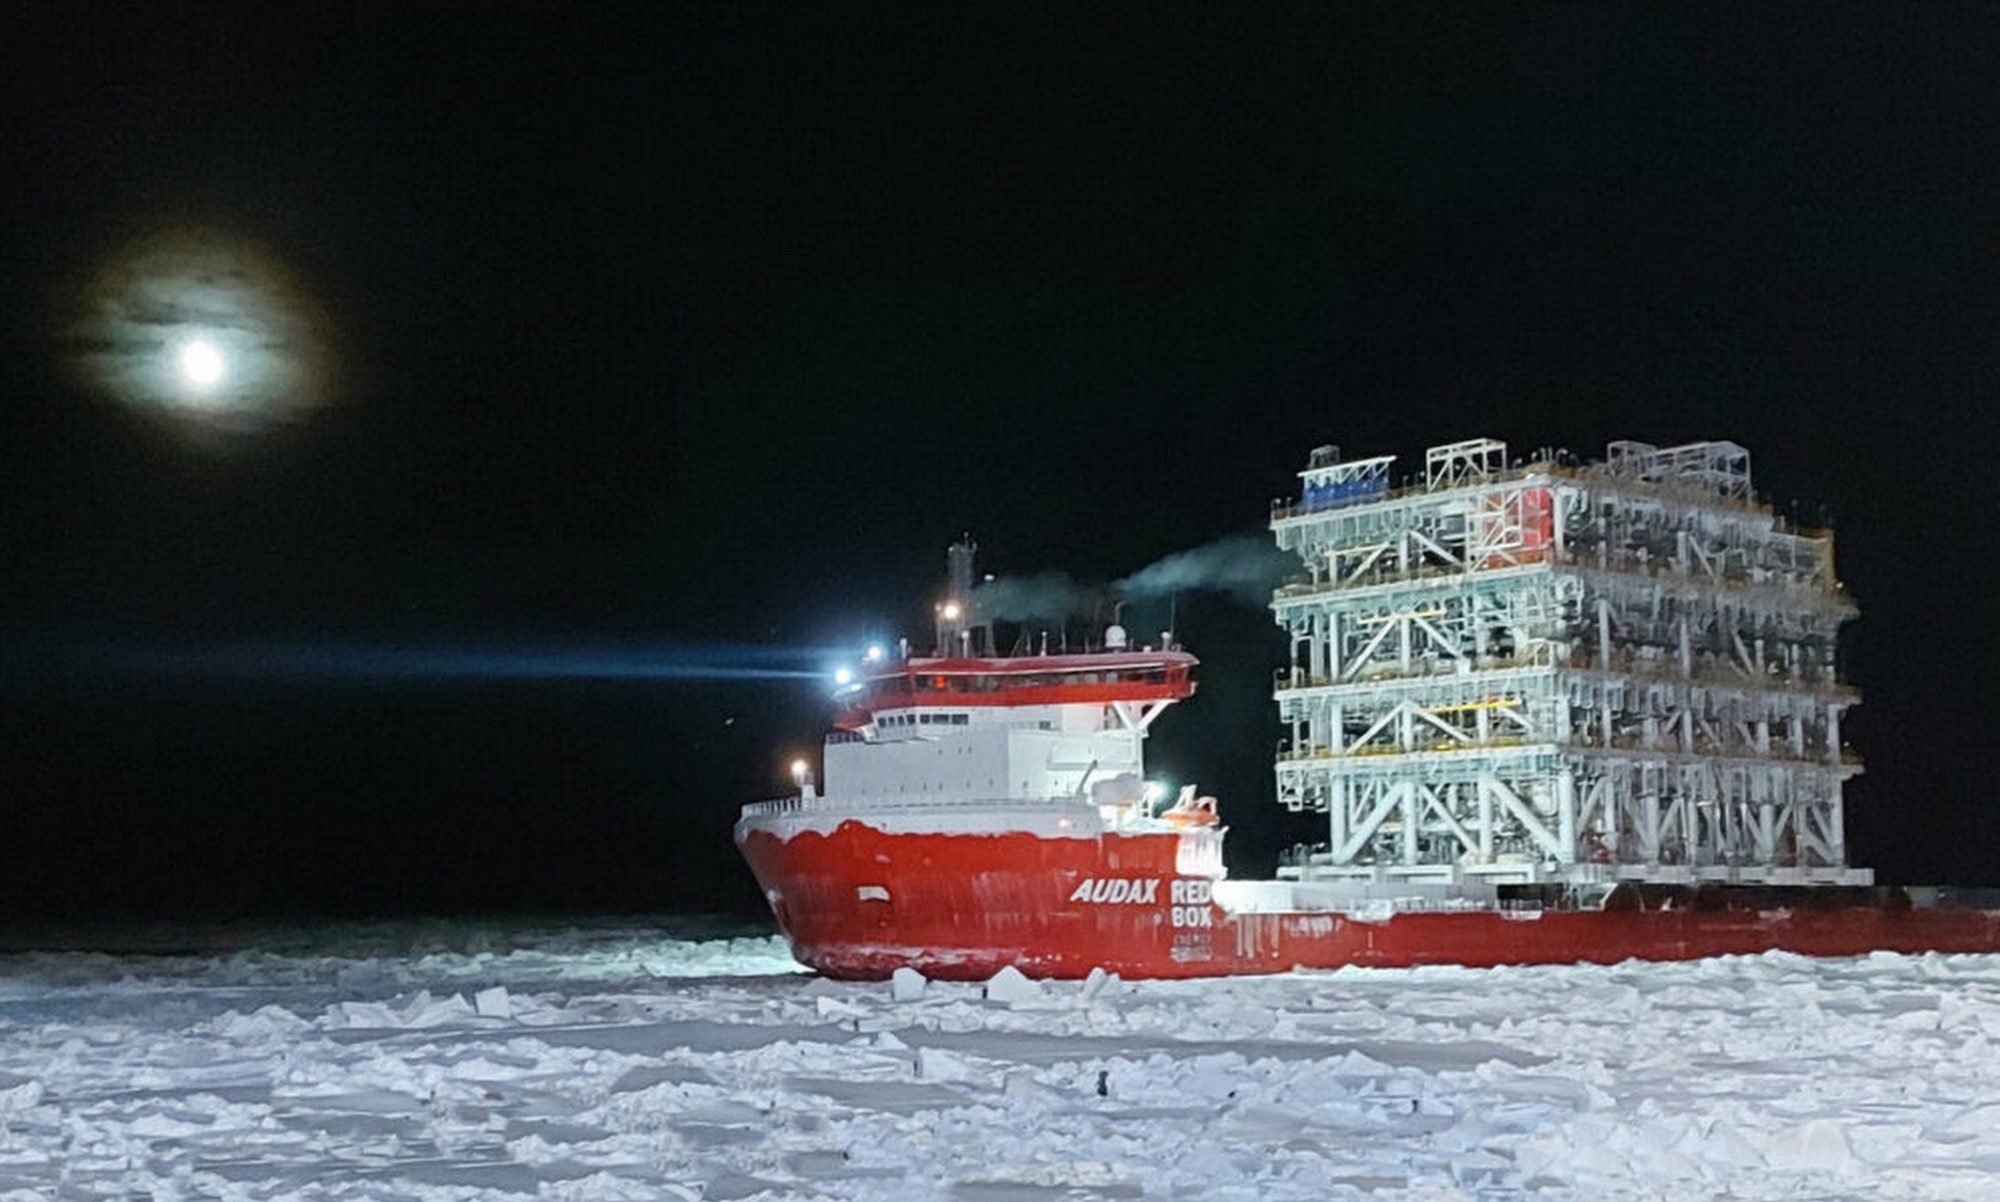 Heavy lift carrier Audax in the Arctic carrying a module for Arctic LNG 2 in February 2022. (Source: Courtesy of Red Box)